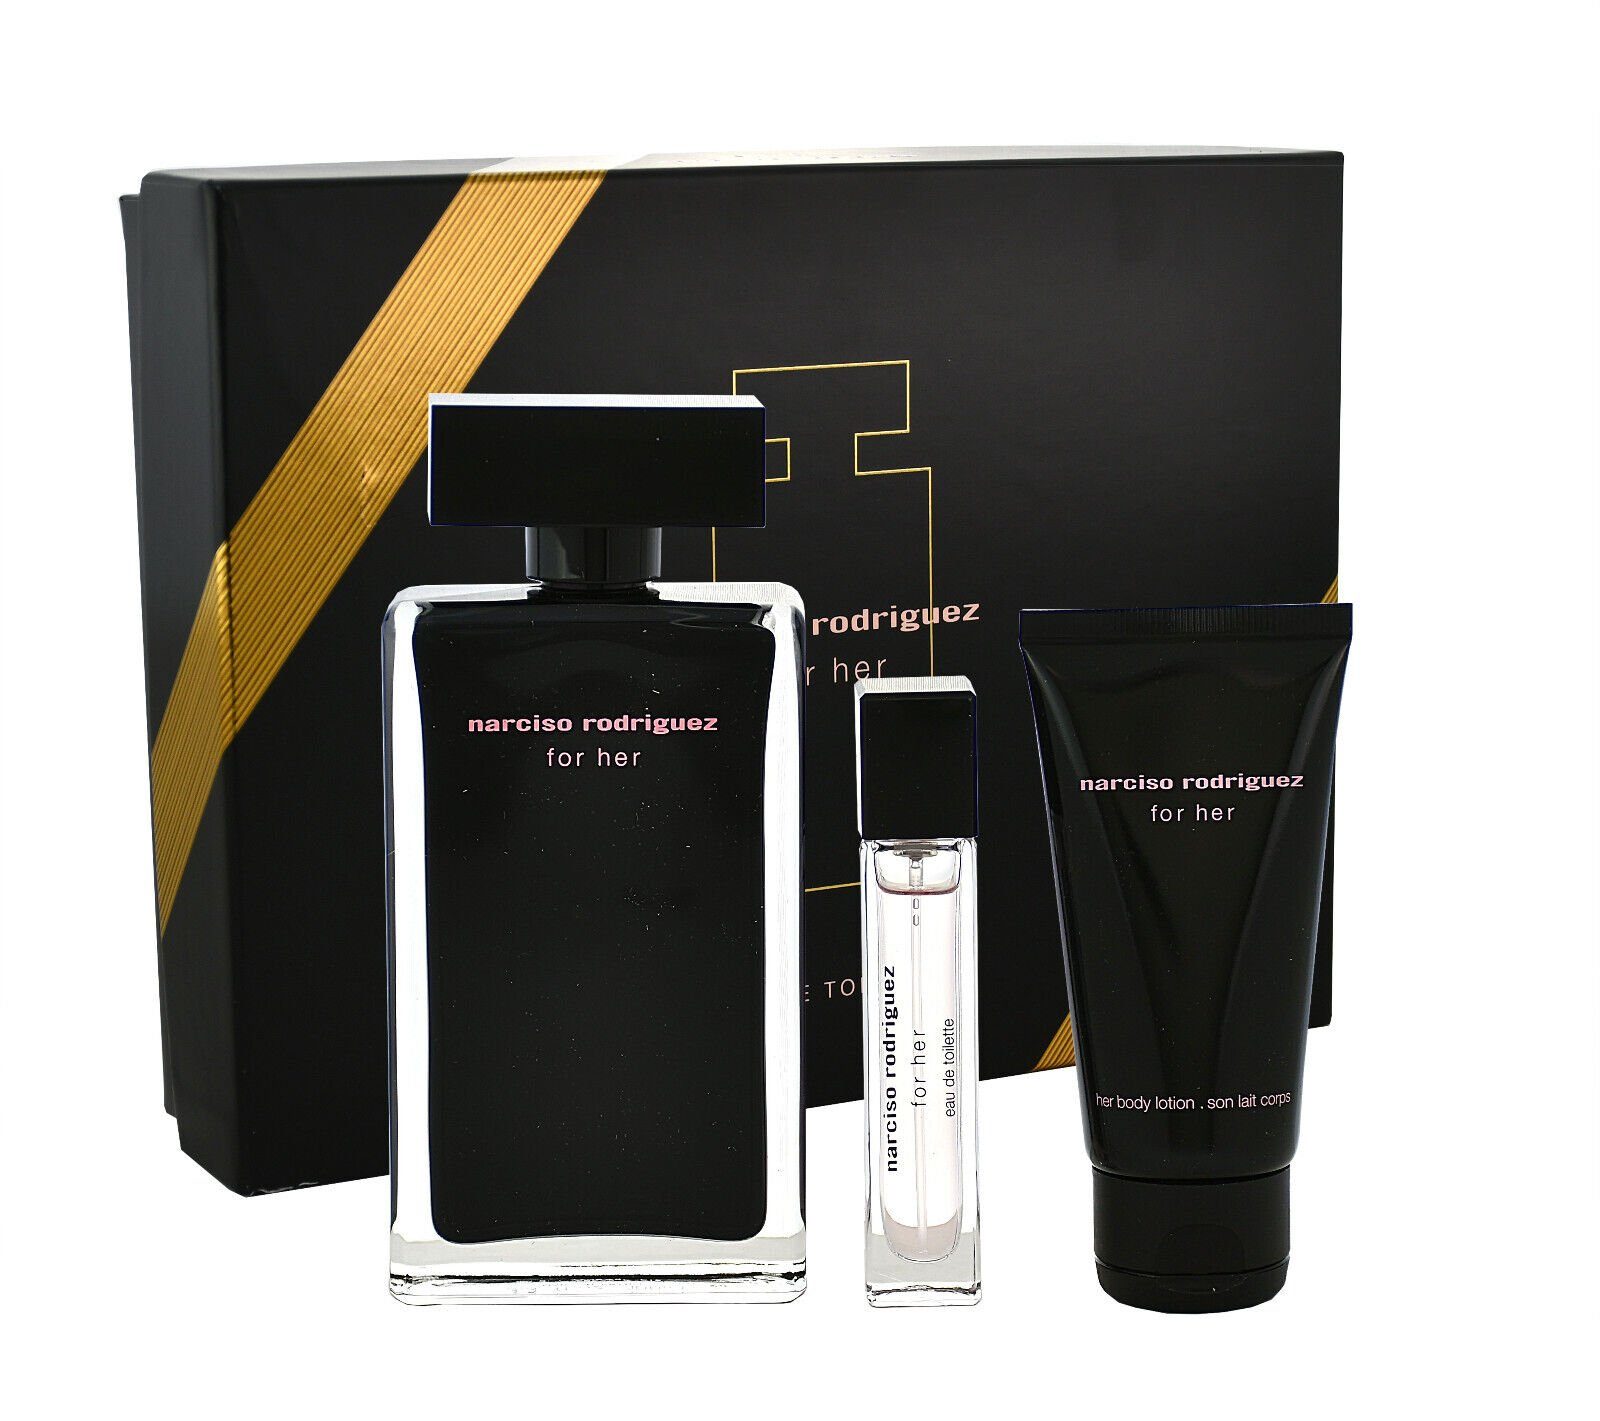 Narcisco 10ml + Narciso For Duft-Set EDT 100ml Rodriguez Her Rodriguez